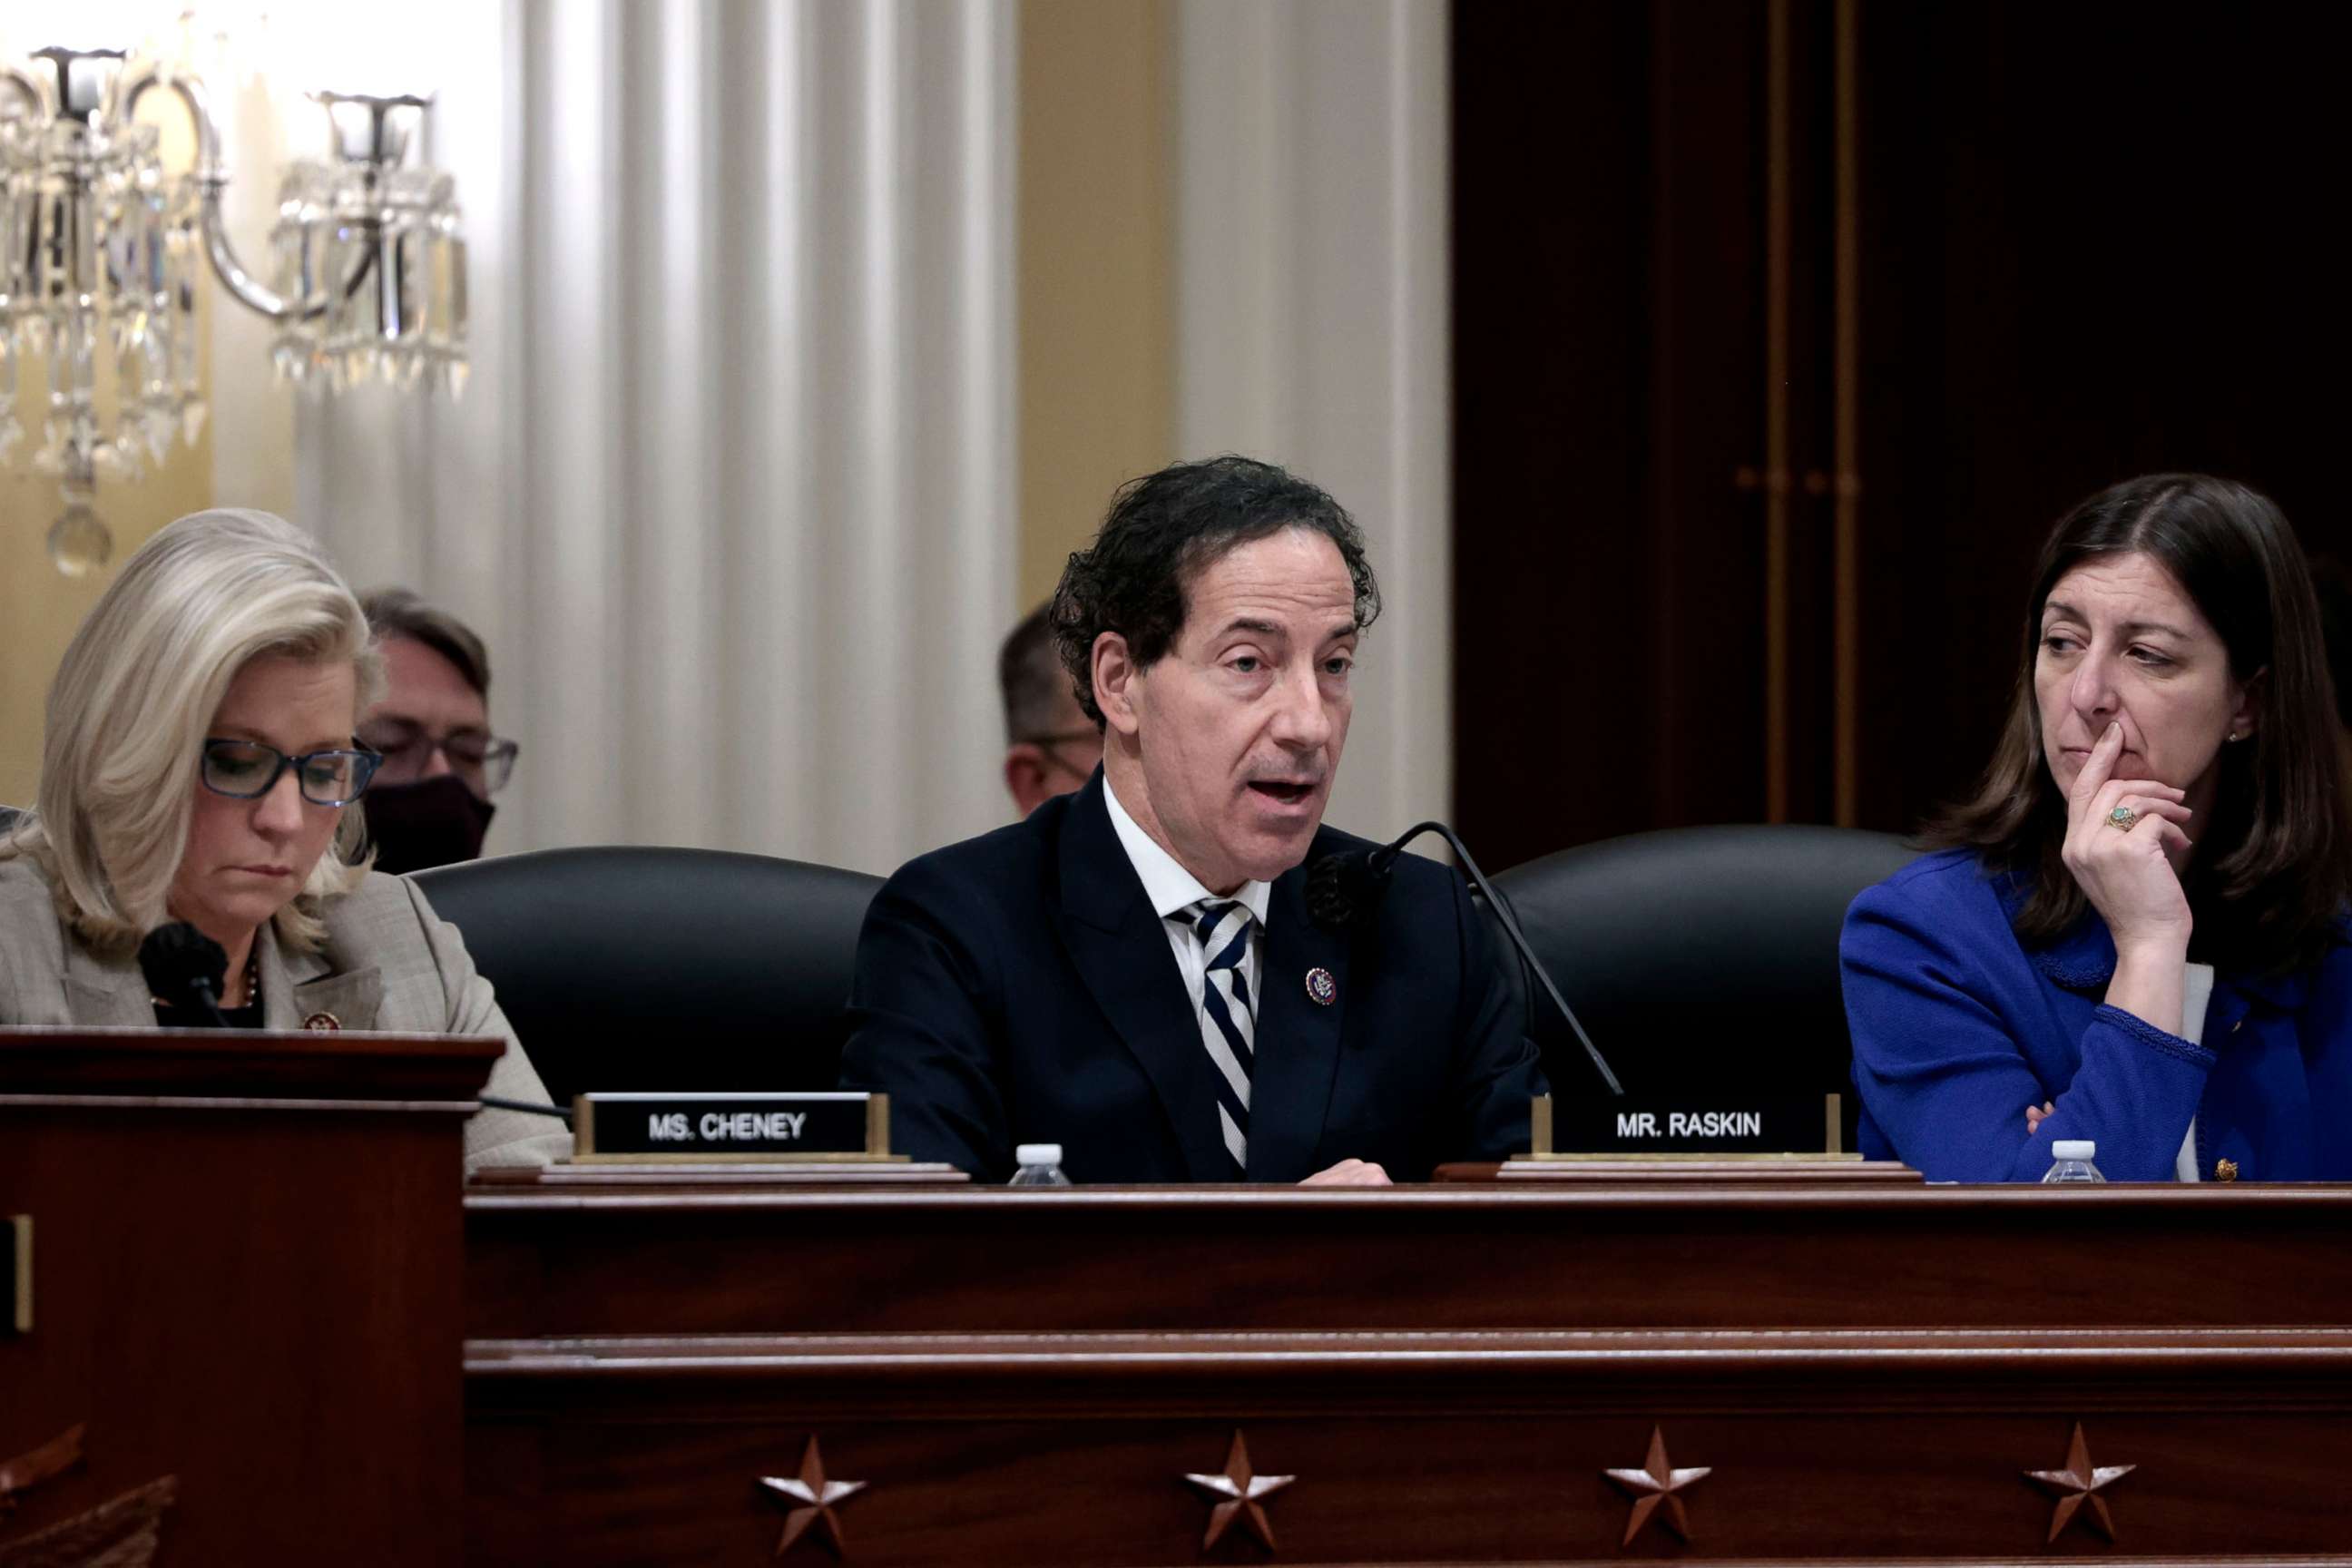 PHOTO: In this Dec. 13, 2021, Rep. Jamie Raskin speaks during a business meeting with the select committee investigating the January 6 attack, on Capitol Hill in Washington, D.C.